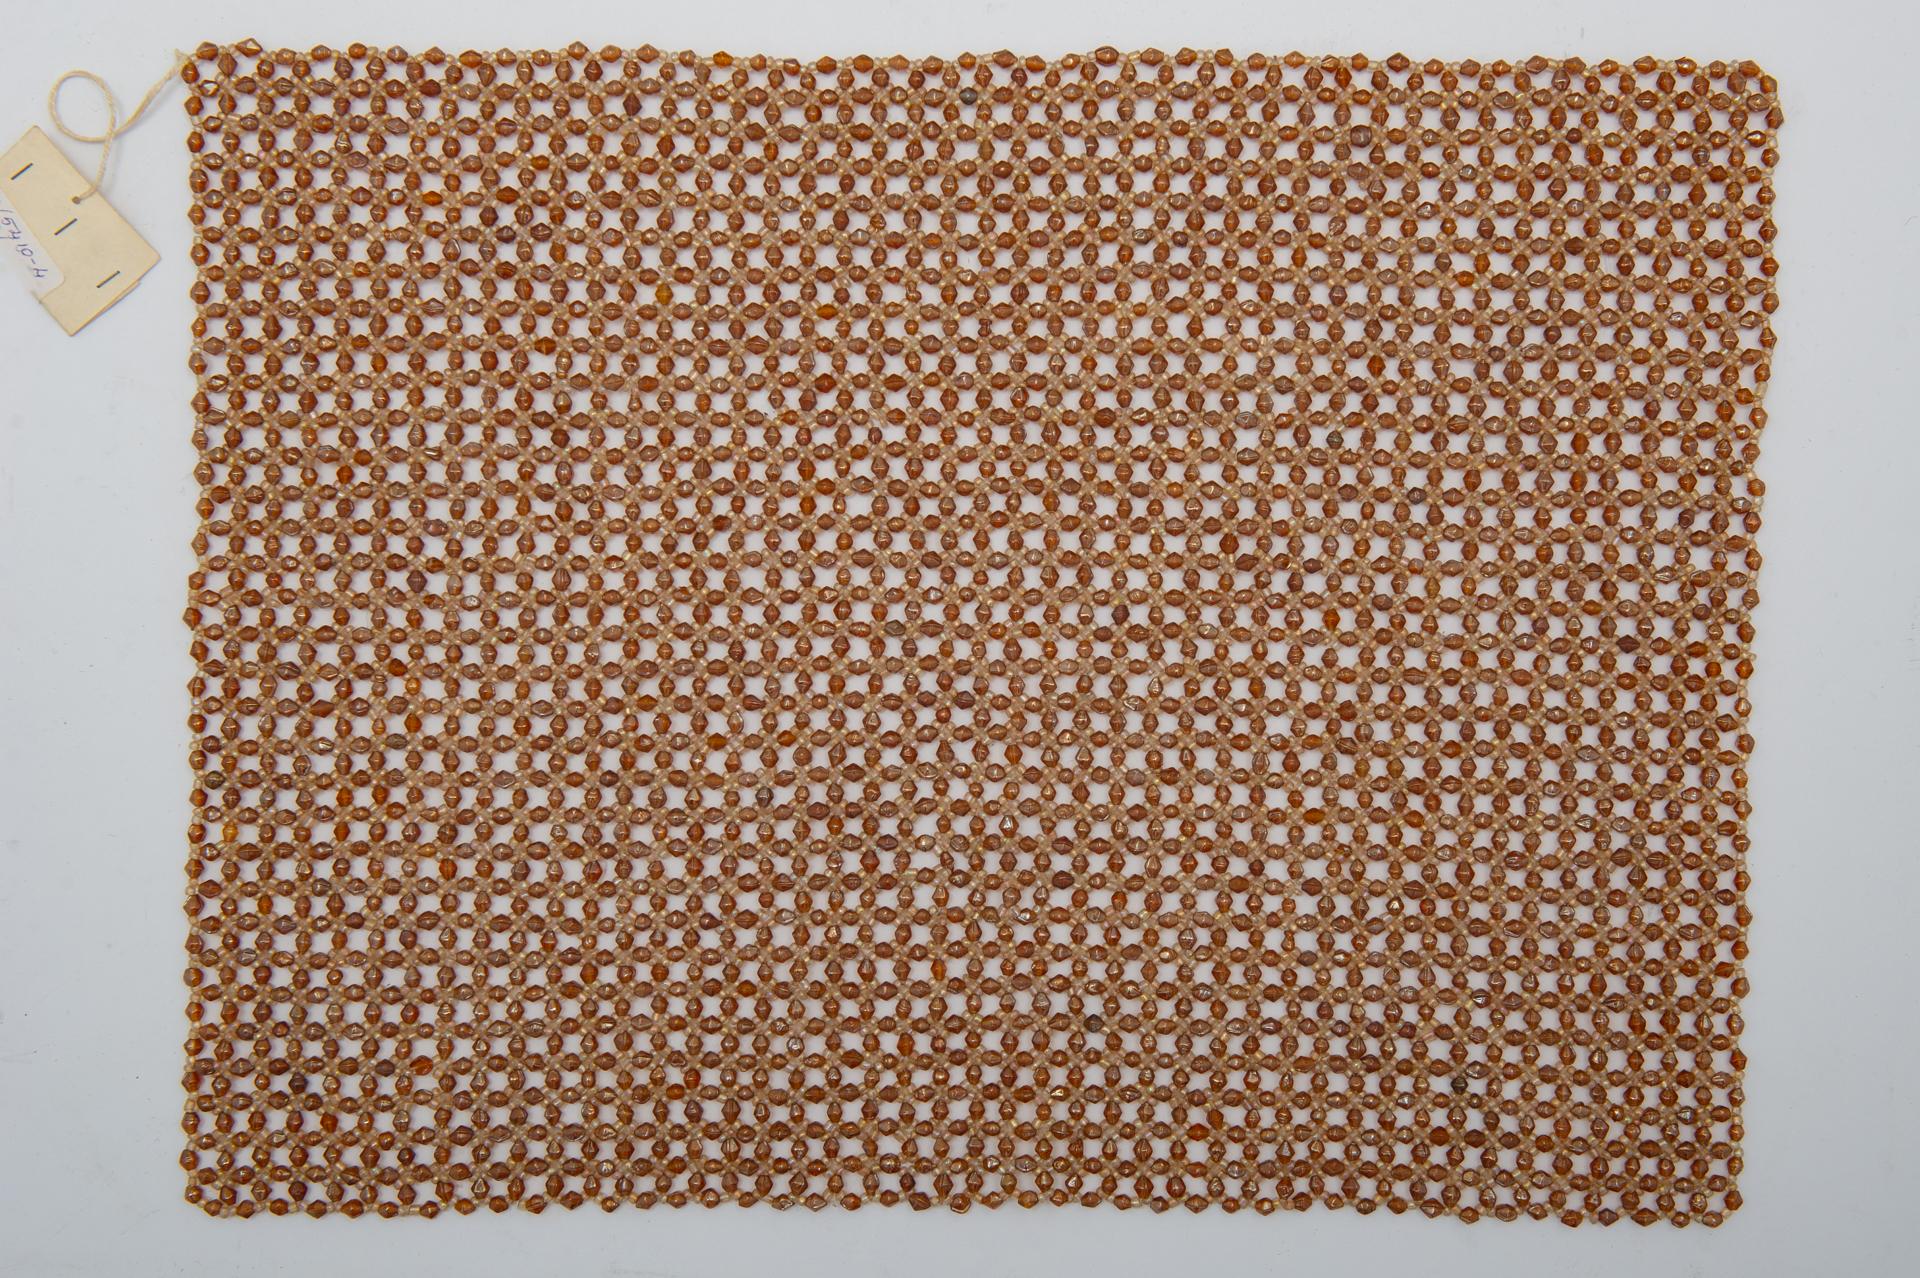 Four rectangles of mauve beads, may be designed as placemats; but I think they can be turned into a beautiful lamp. 
What do You thing ? It's an idea.